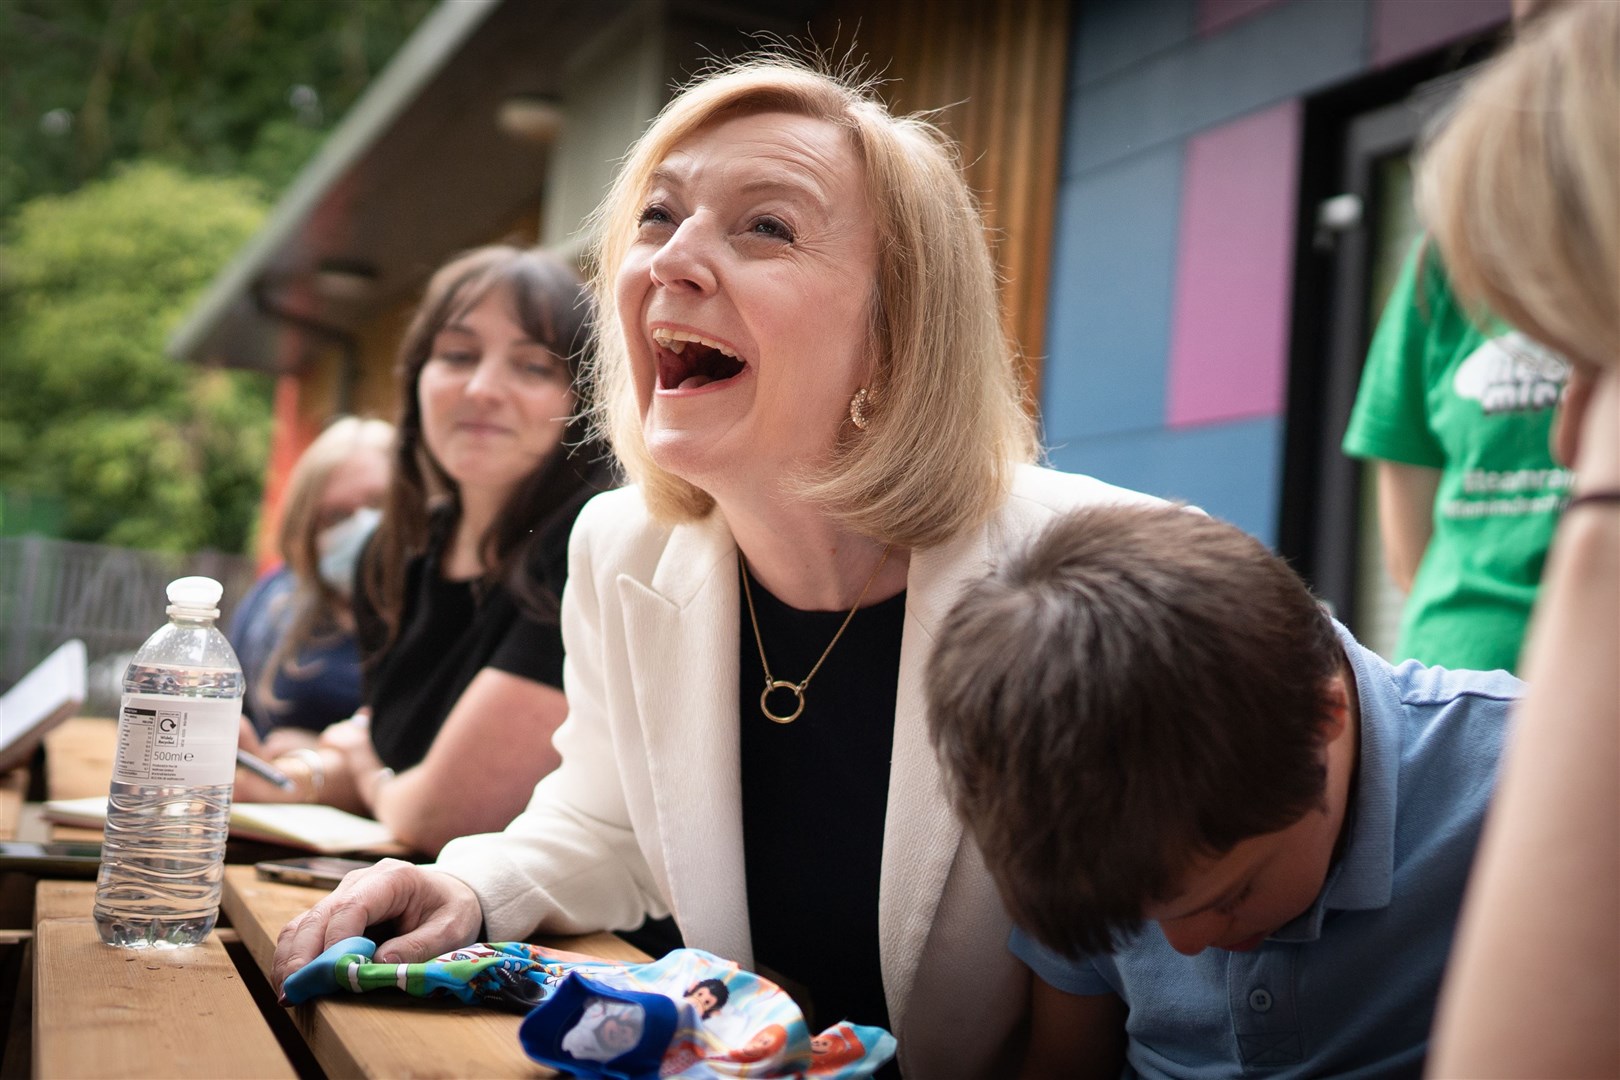 Foreign Secretary and Tory leadership candidate Liz Truss during a visit to the children’s charity Little Miracles in Peterborough (Stefan Rousseau/PA)